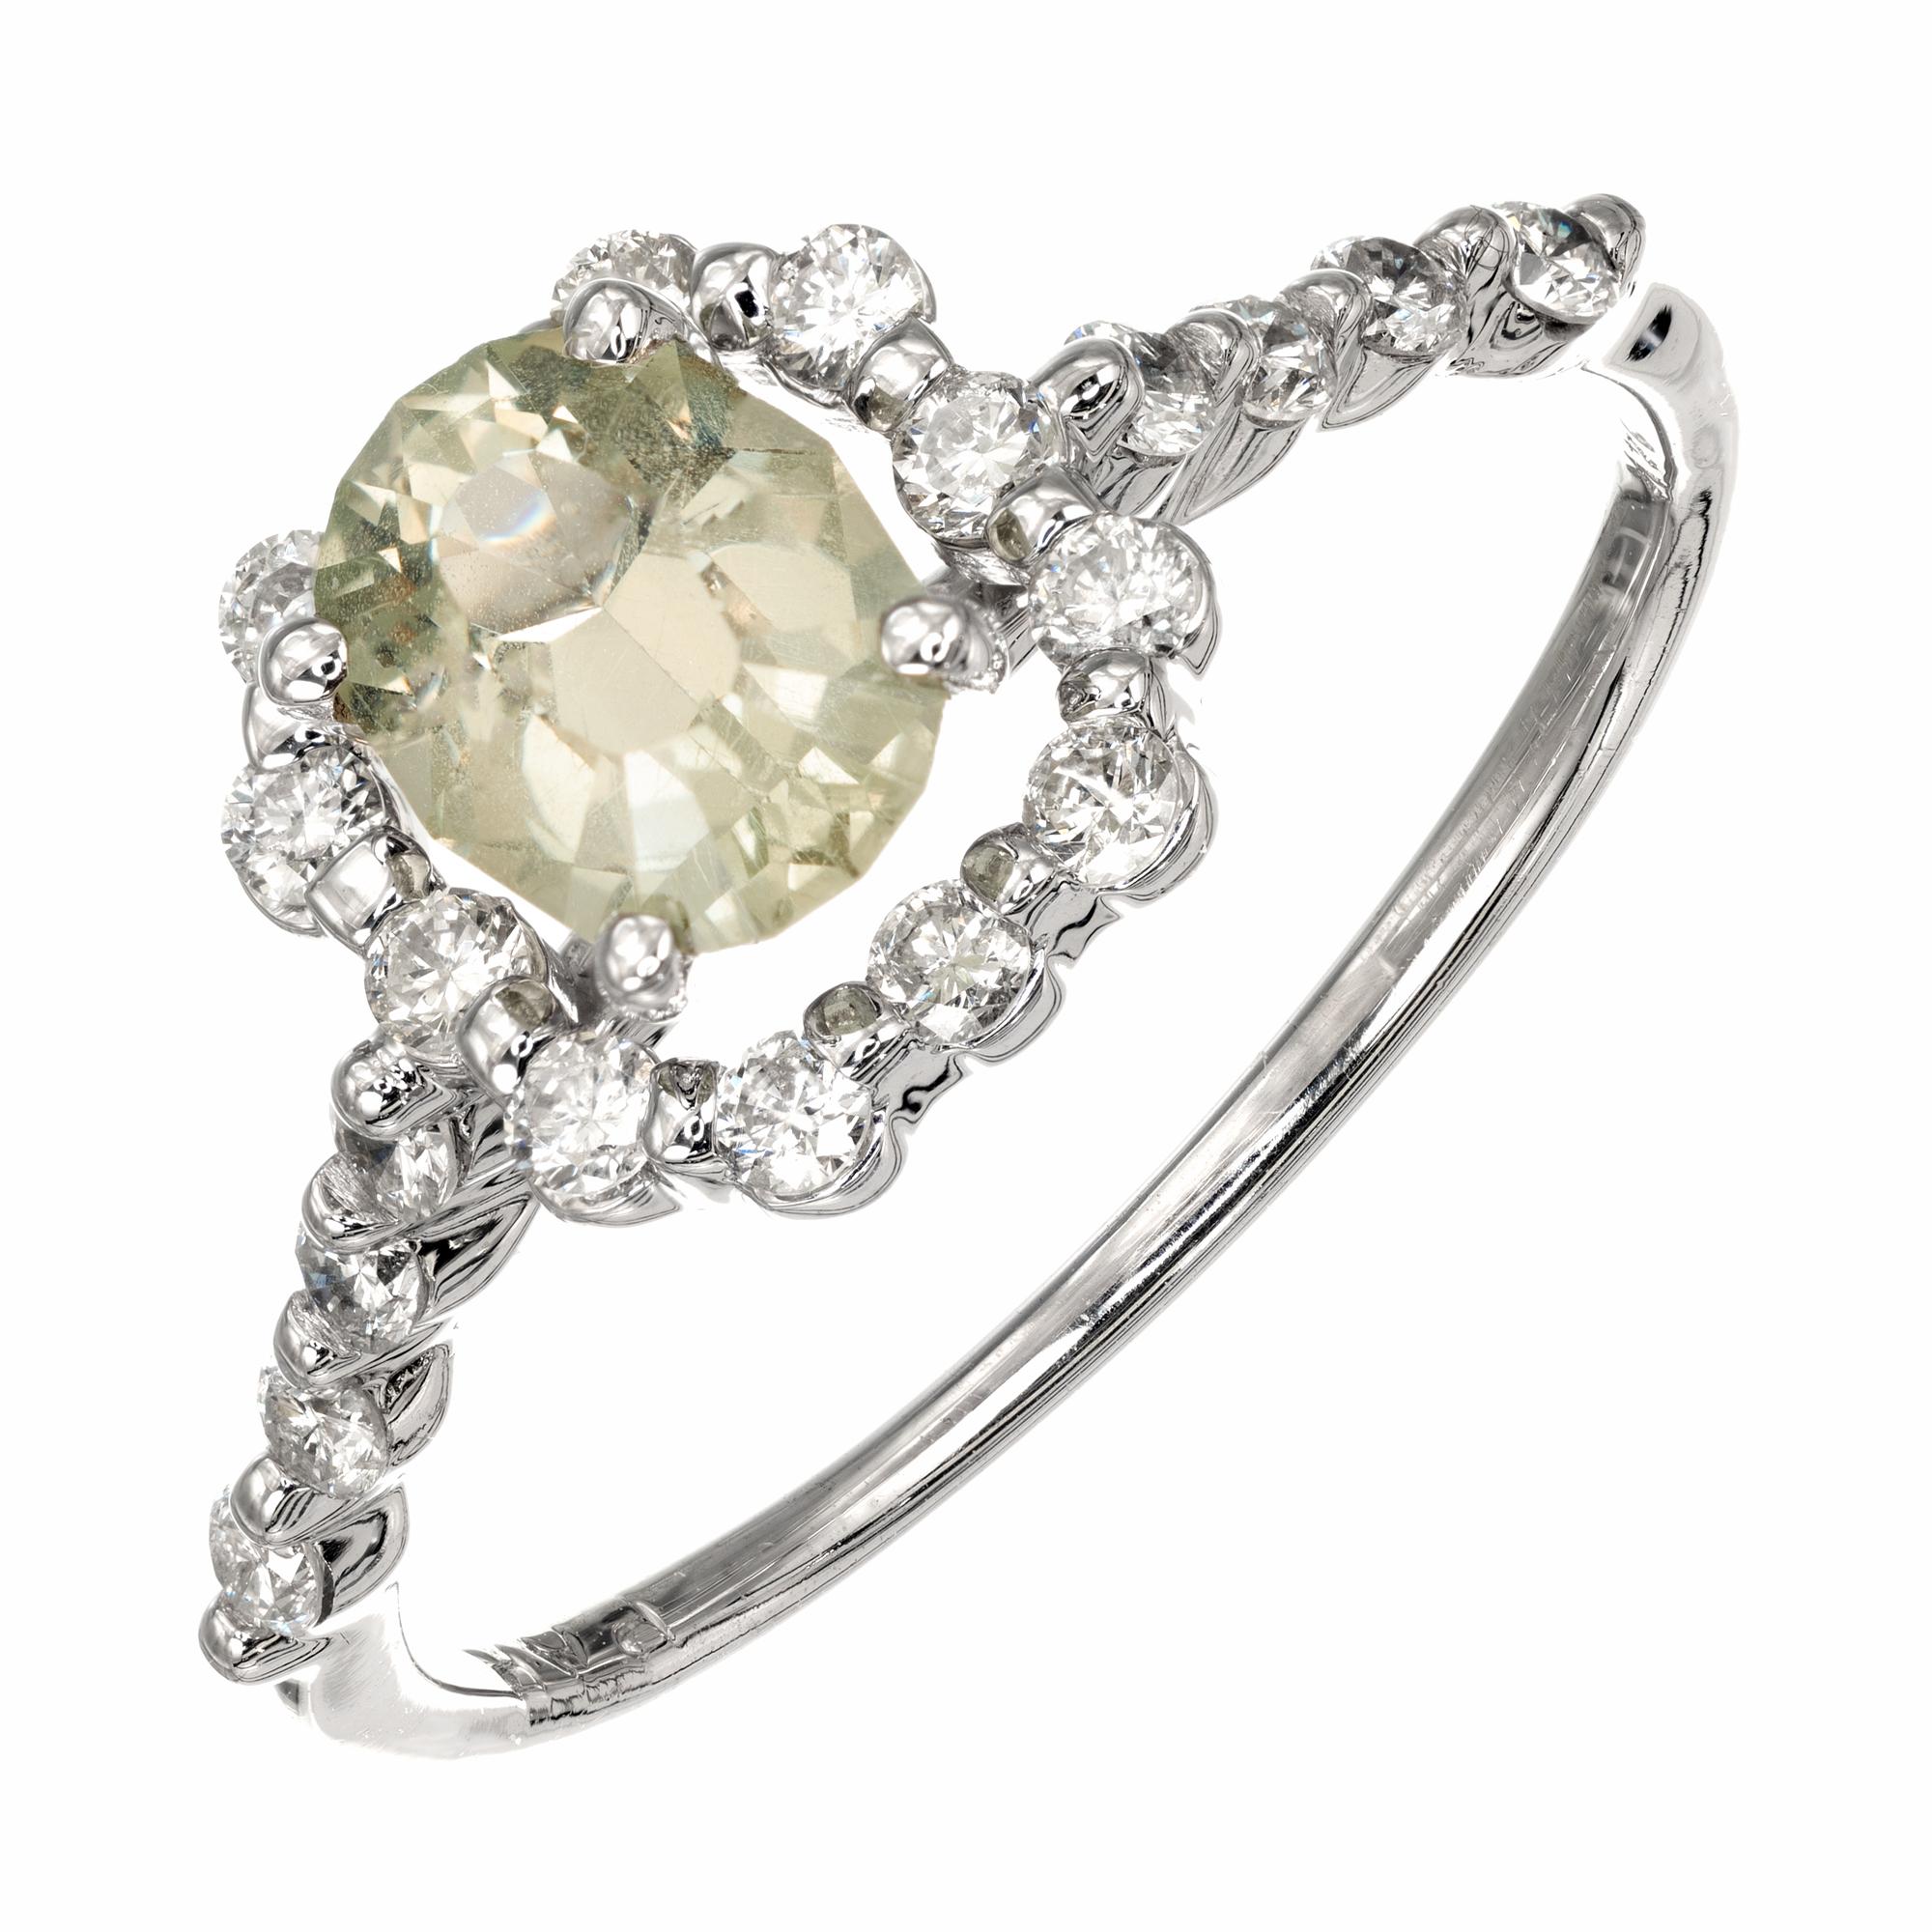 Peter Suchy natural Montana sapphire and diamond engagement ring. The center sapphire is a mix between light yellow and green coloring with a halo of round brilliant cut diamonds. The sapphire is GIA Certified natural no heat. Classic new halo